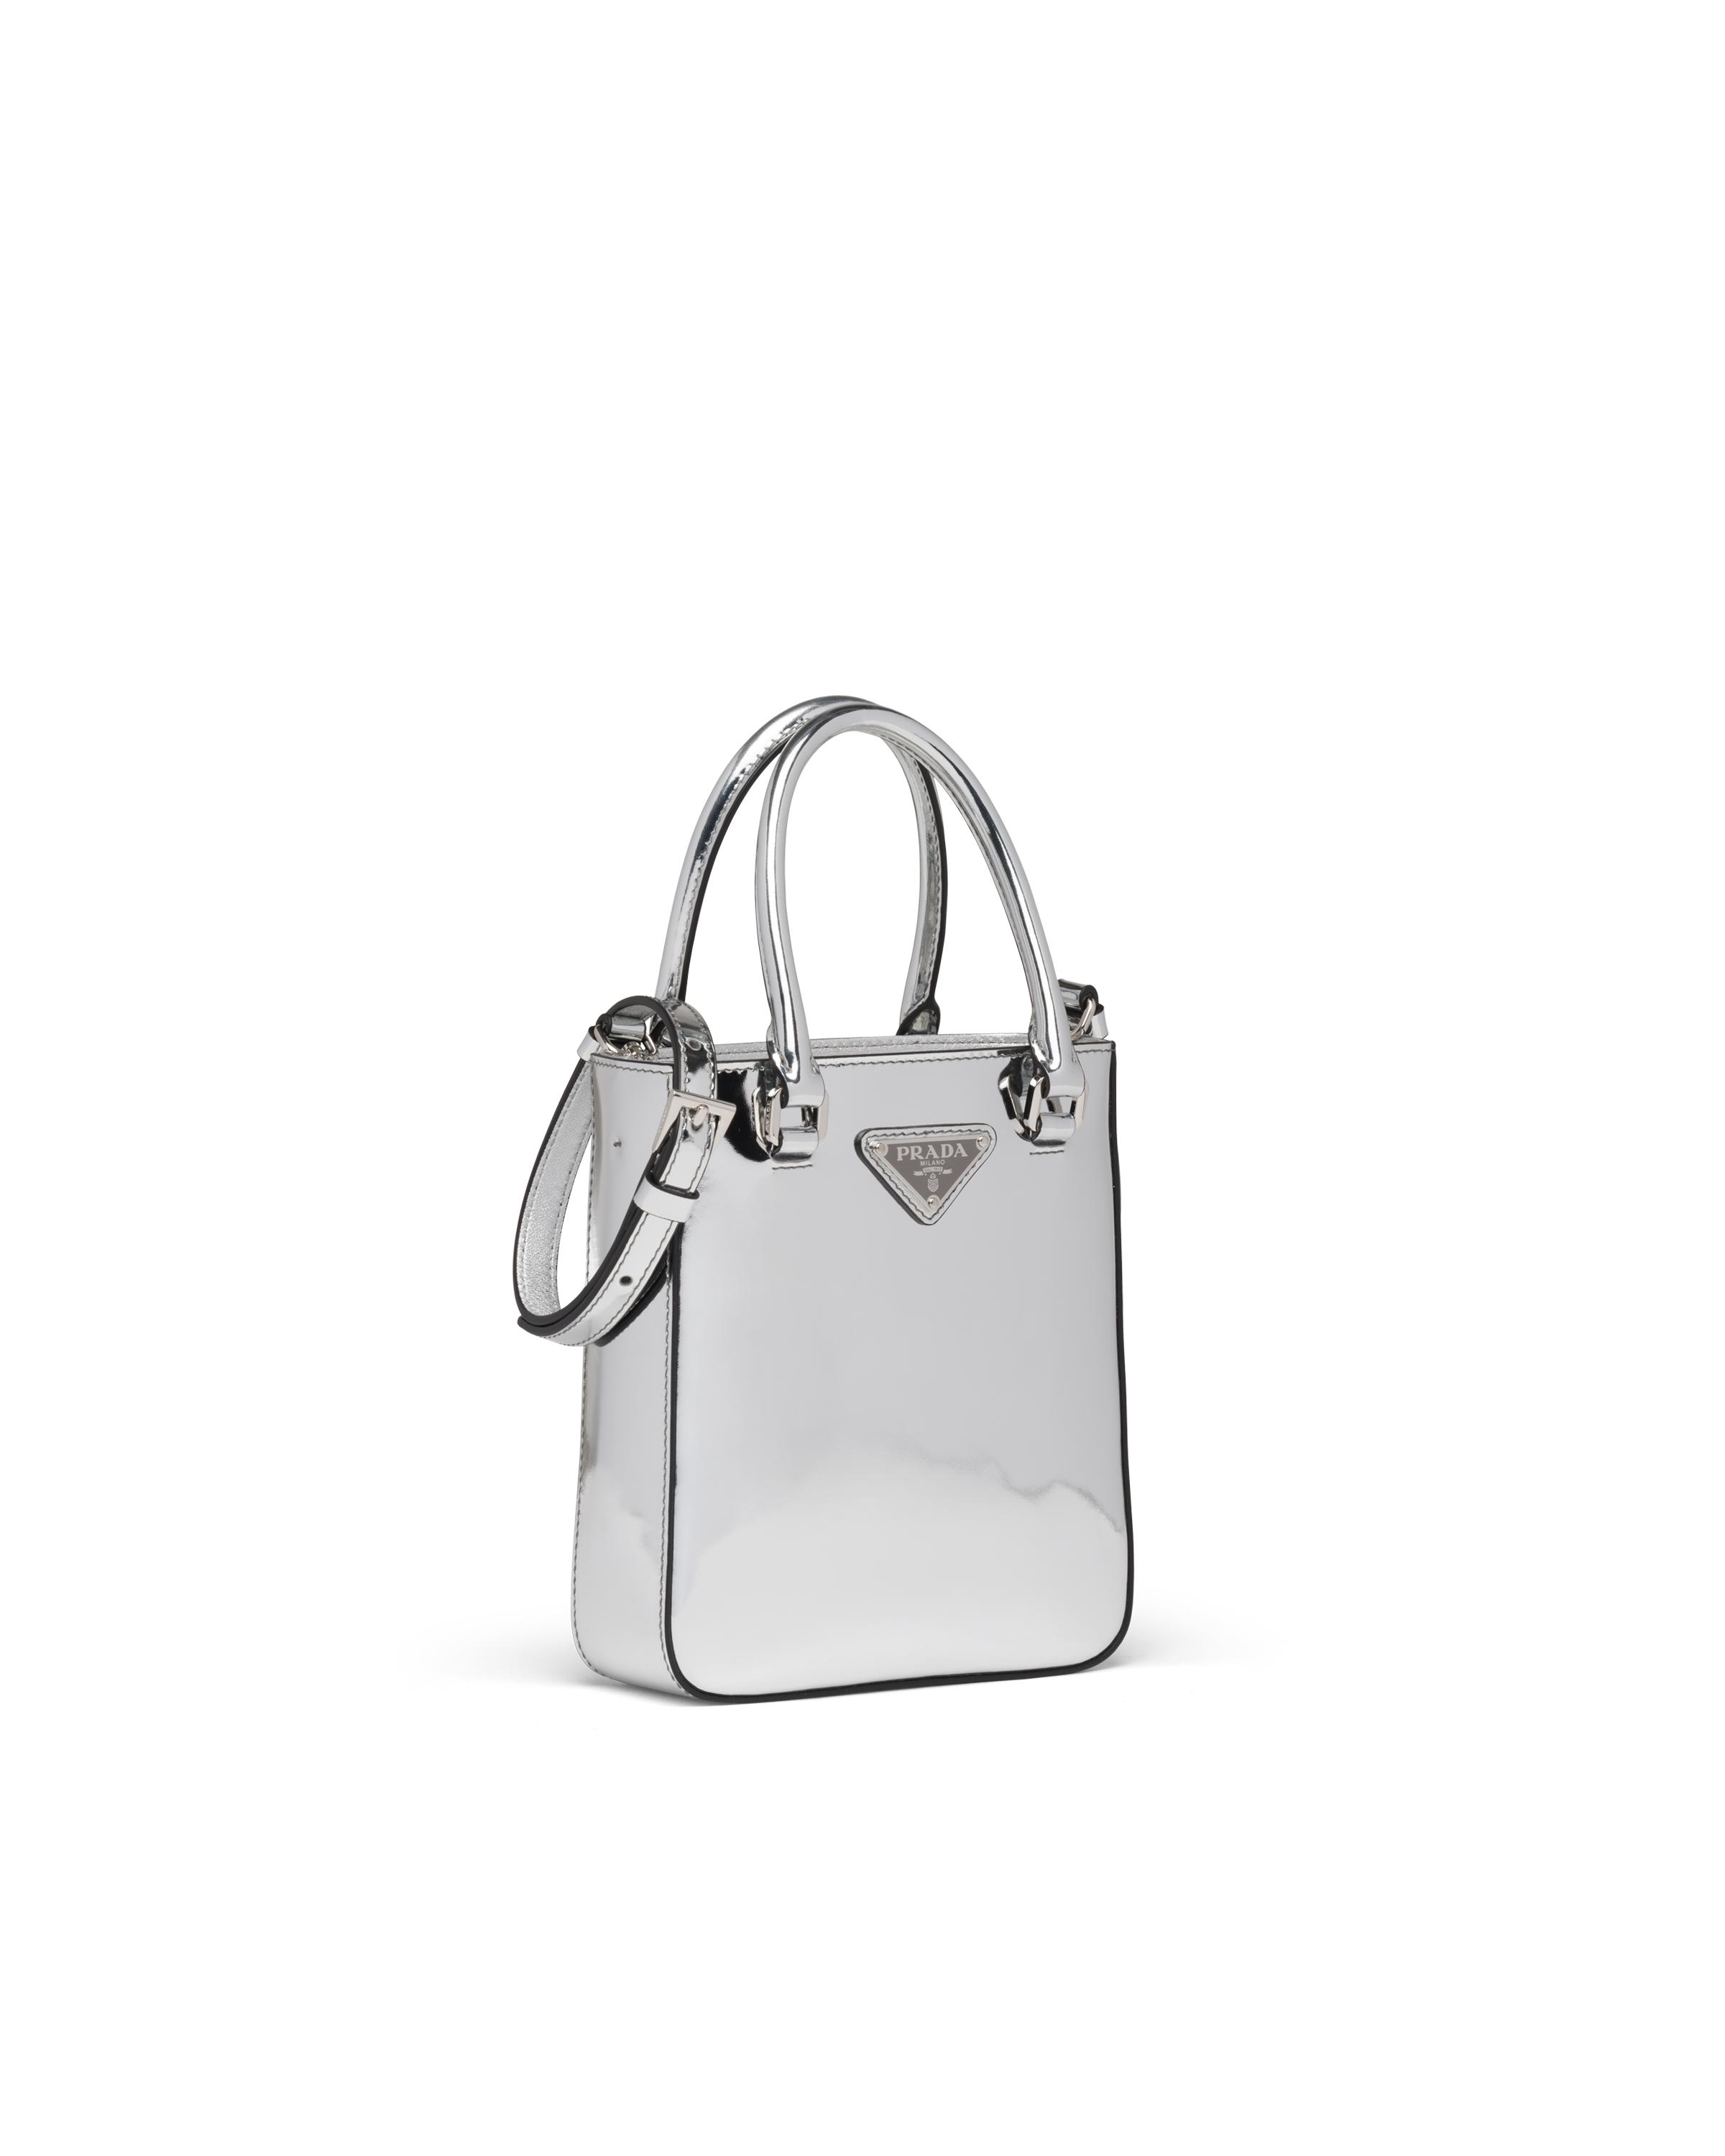 Prada Small Brushed Leather Tote in Silver (Metallic) - Lyst